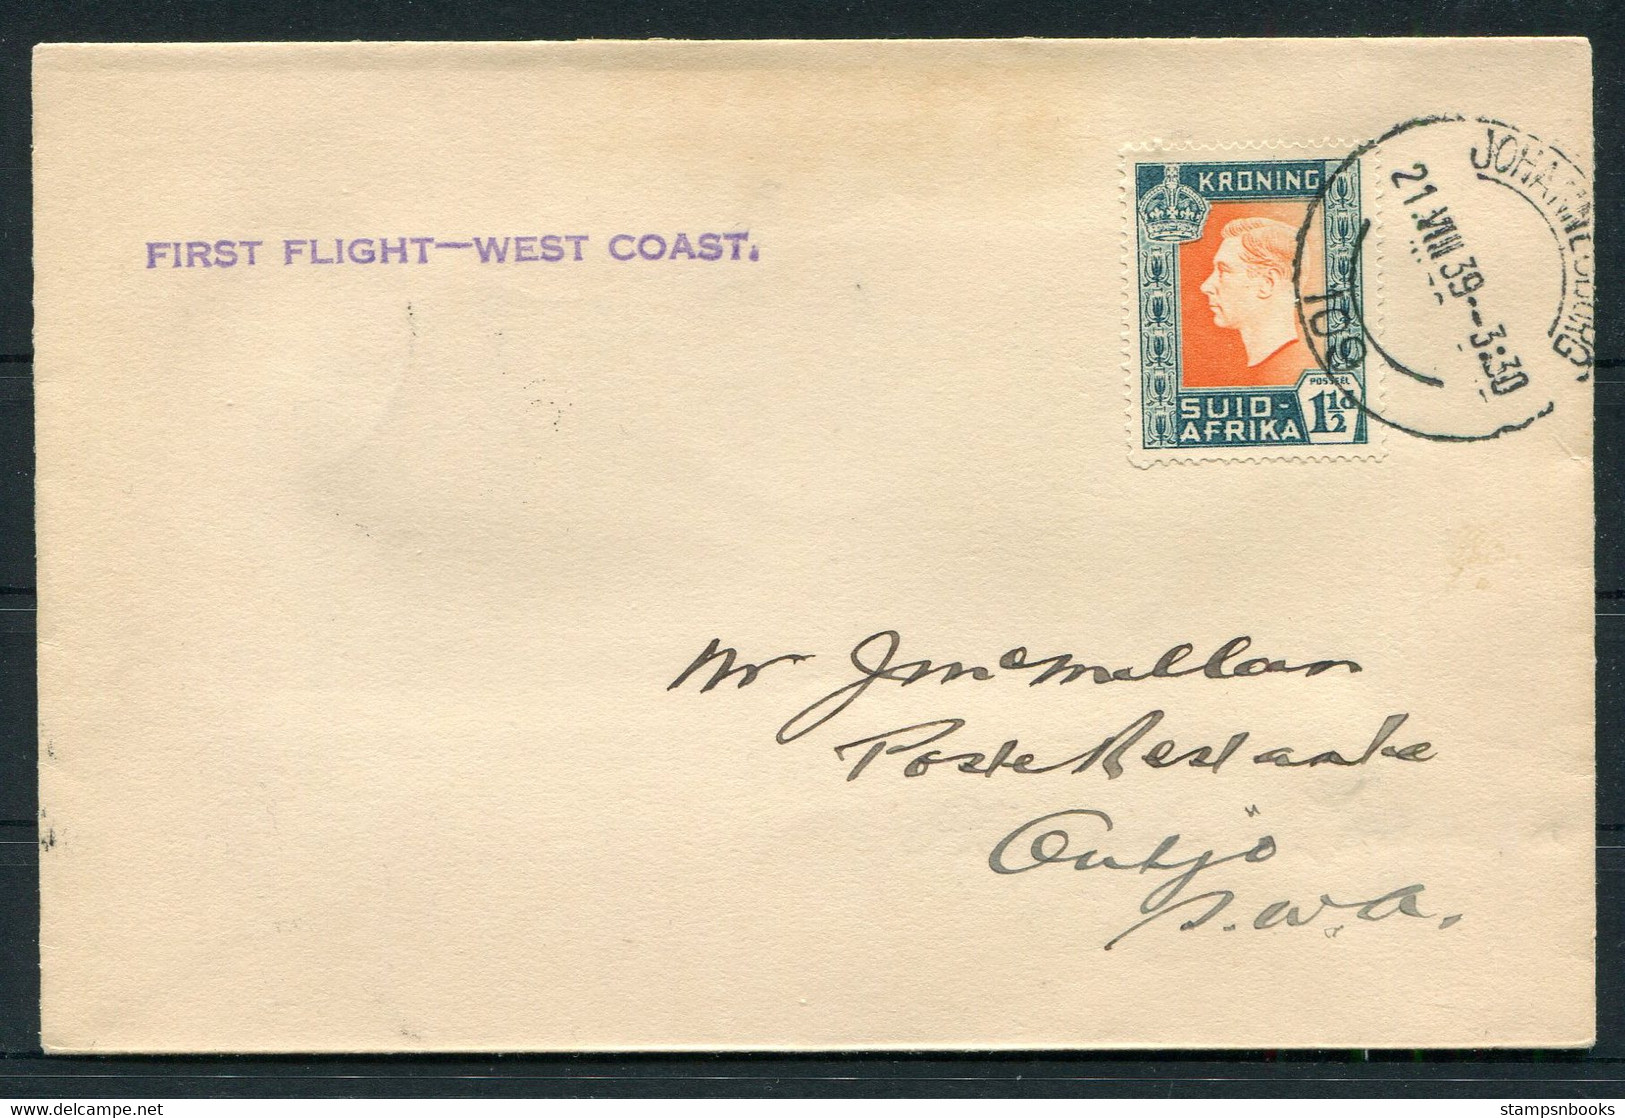 1939 (21st August) South Africa, West Coast Route First Flight Cover. Johannesburg - Outjo S.W.A. - Airmail